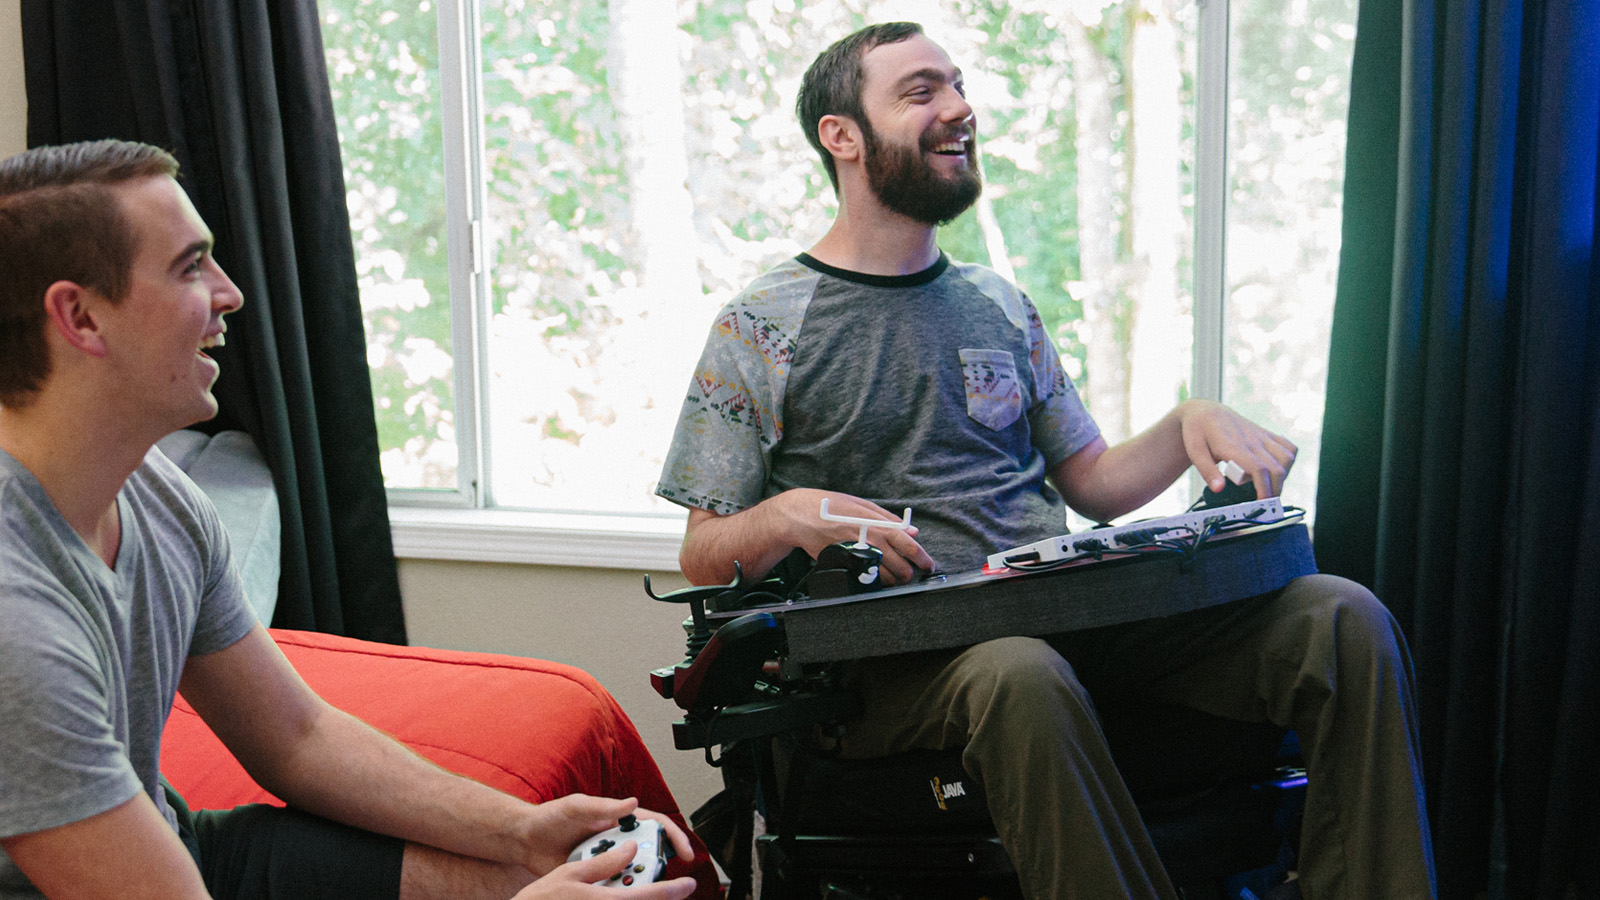 Spencer Allen uses the Xbox Adaptive Controller to play a game with a friend.